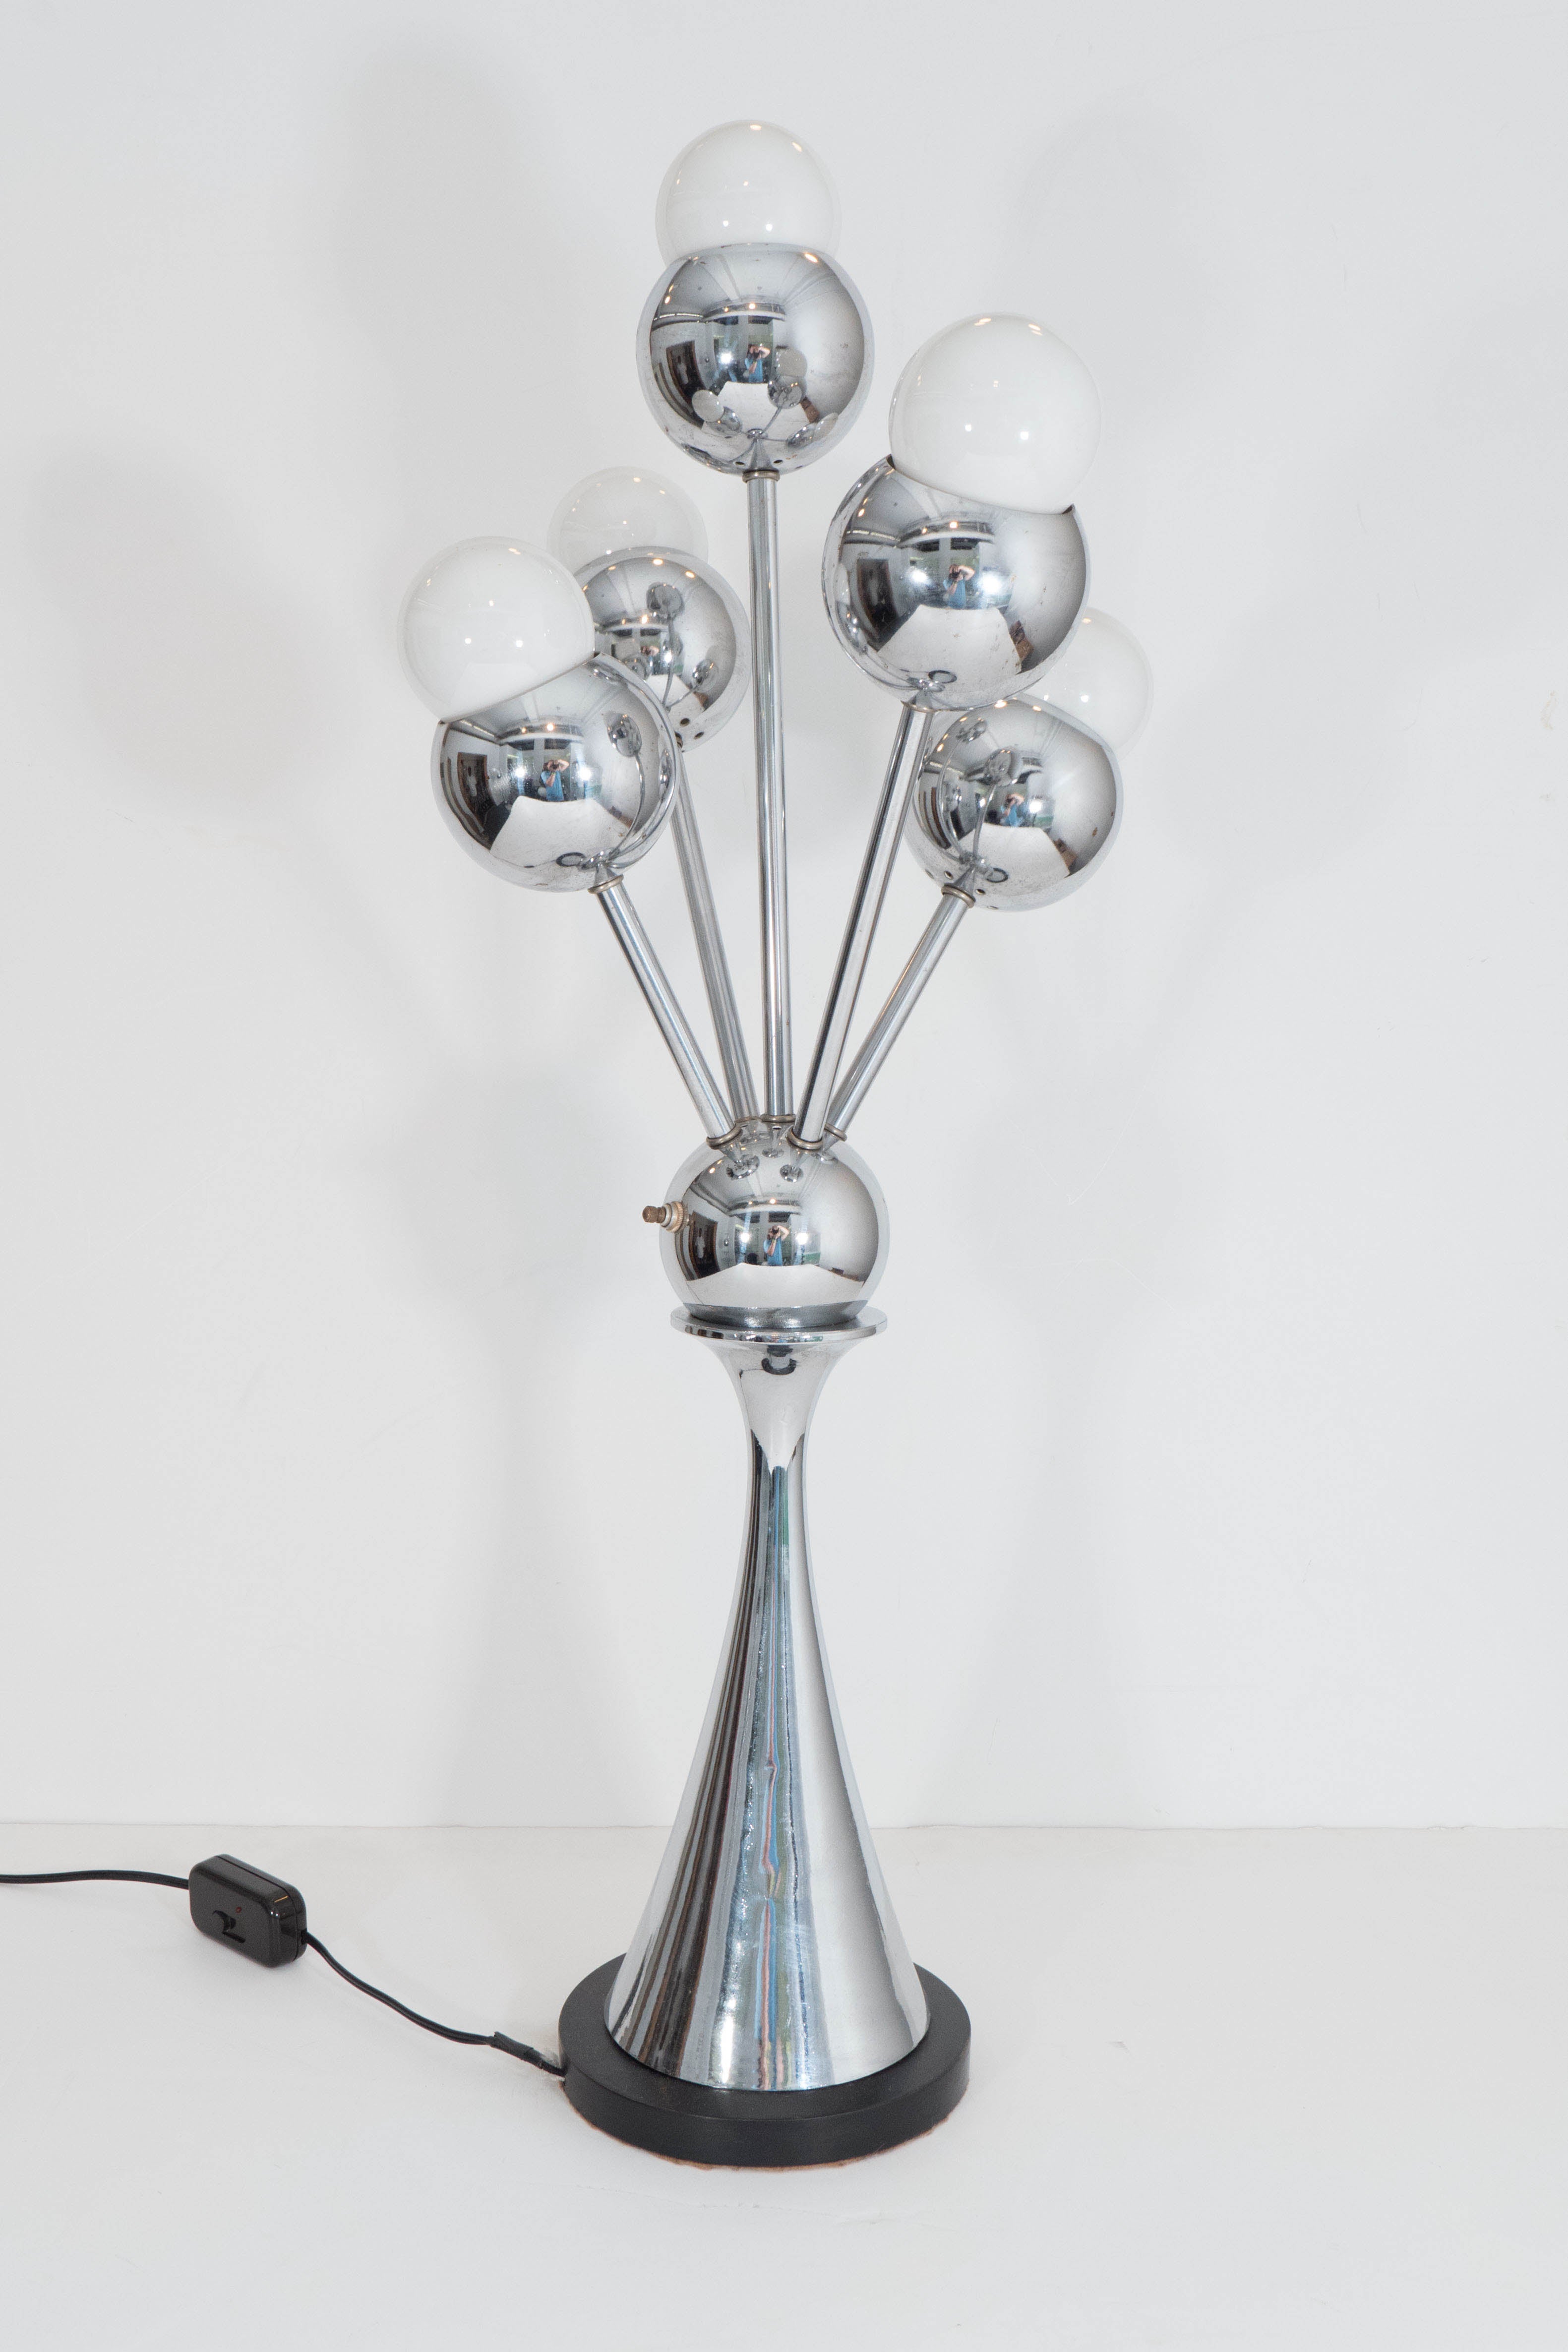 Pair of Space Age 1970s Chrome Table Lamps with Five Radiating Lights 2